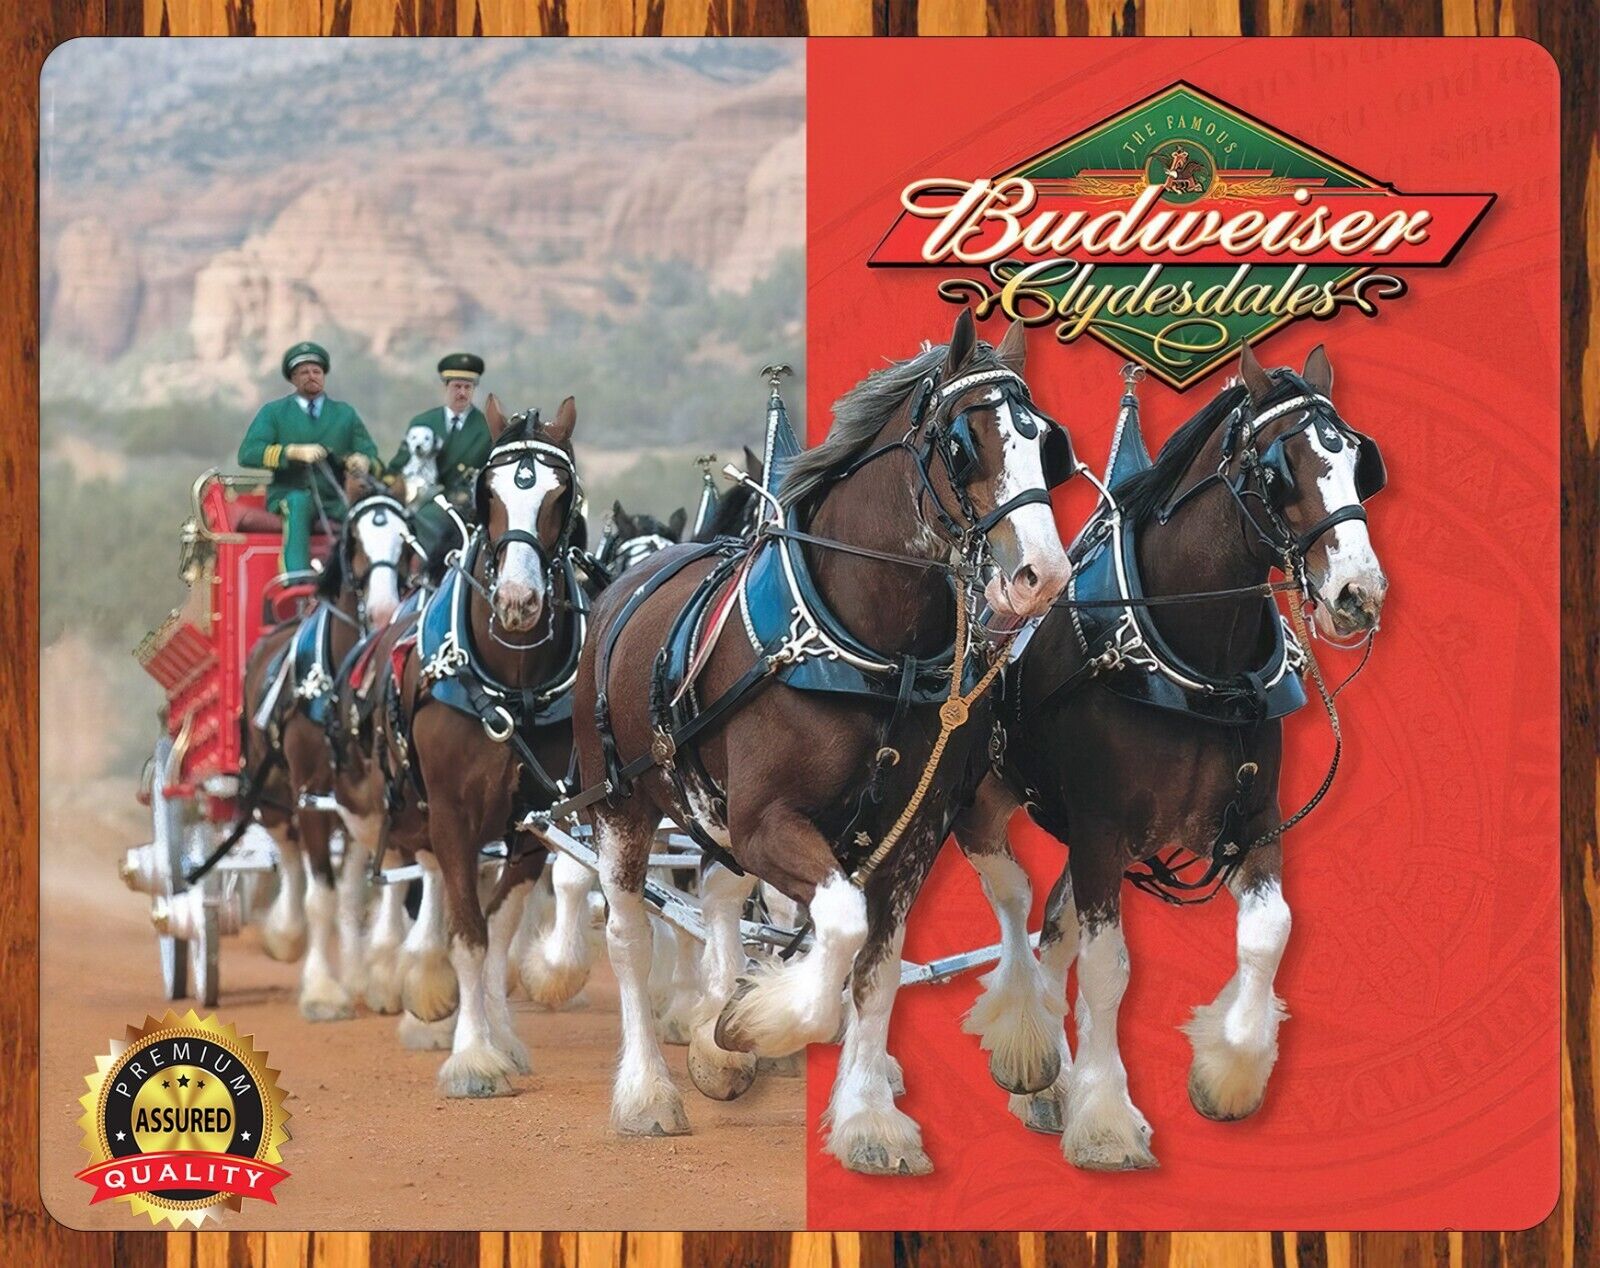 Budweiser - Clydesdales - Rare - King of Beers - Metal Sign 11 x 14